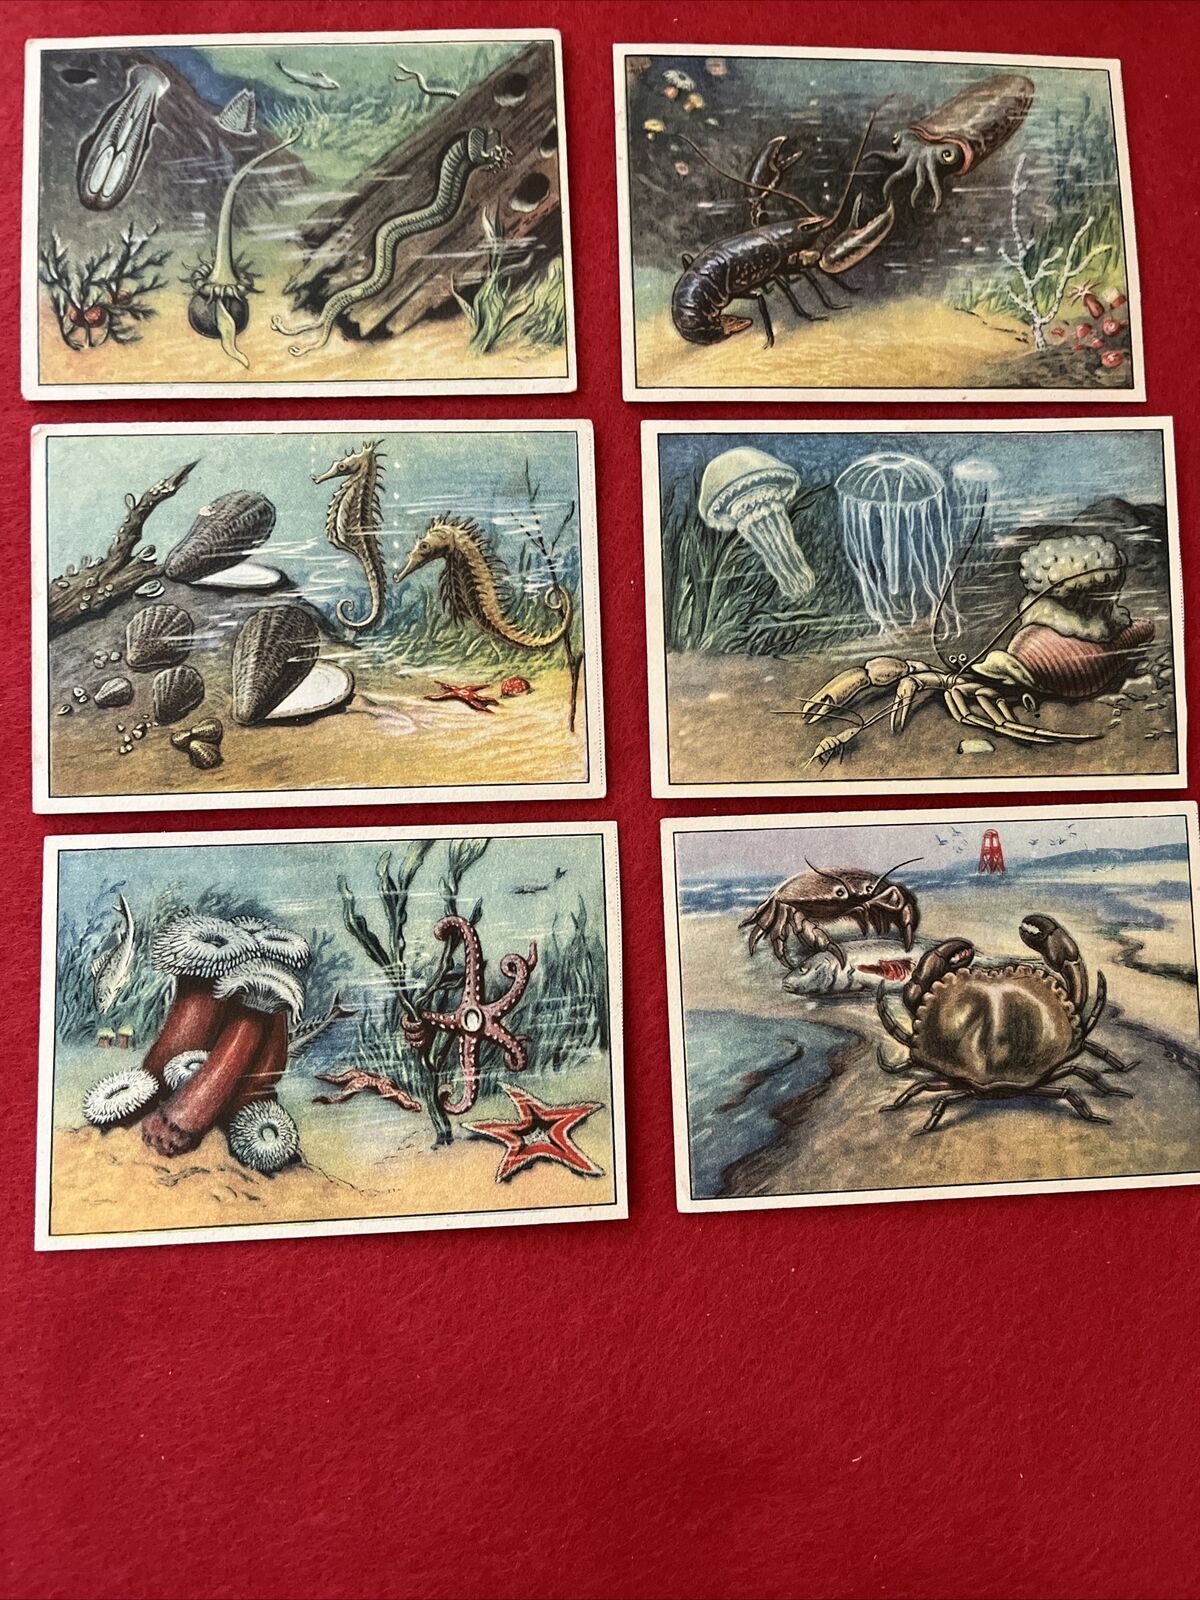 1929 Echte Wagner “Animals Of The Sea” Complete Trade Card Set (6)   VG-EX